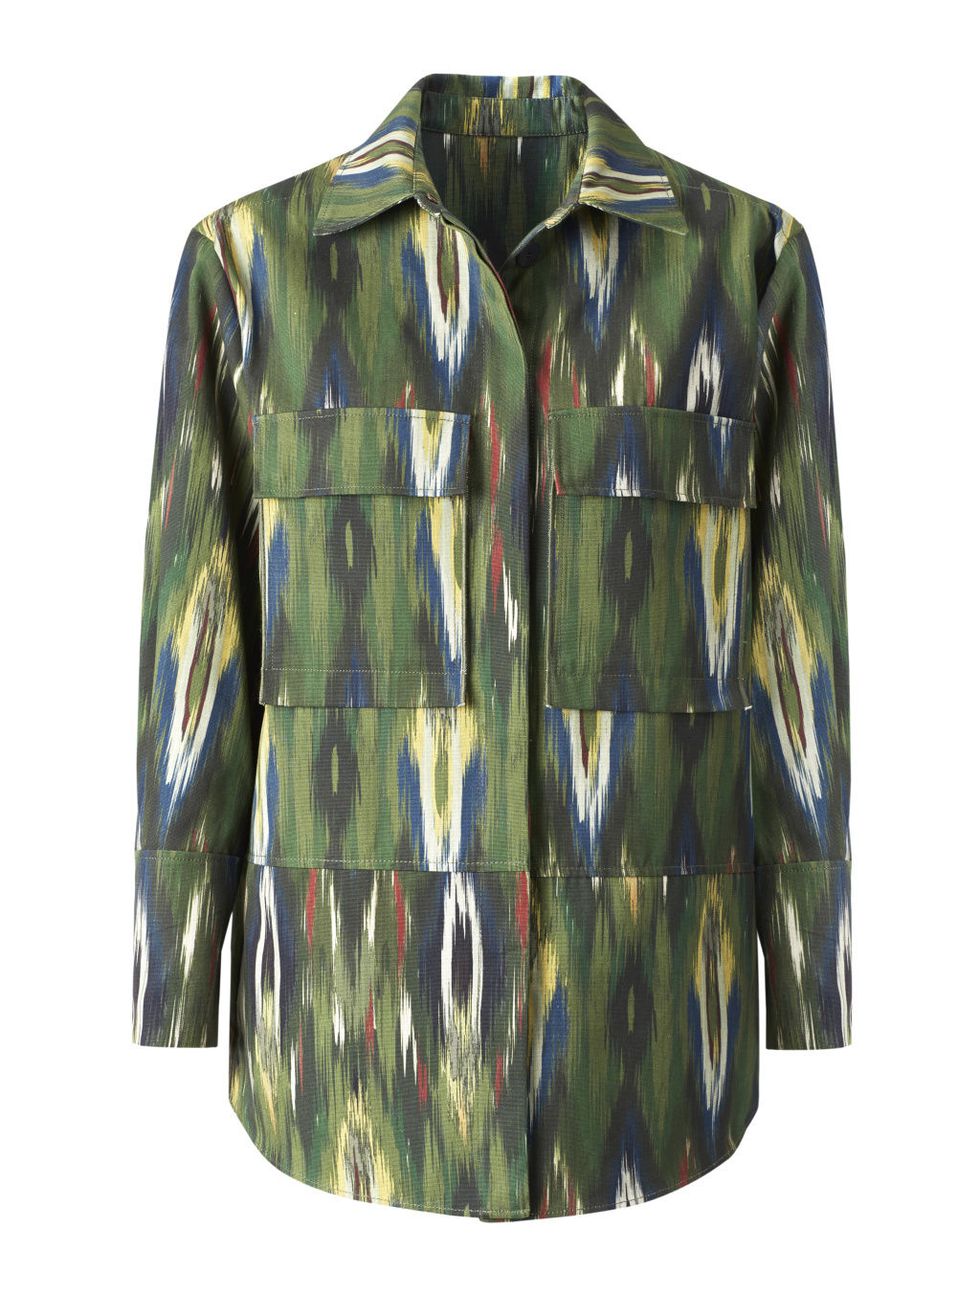 Clothing, Sleeve, Outerwear, Green, Camouflage, Pattern, Jacket, Military camouflage, Design, Uniform, 